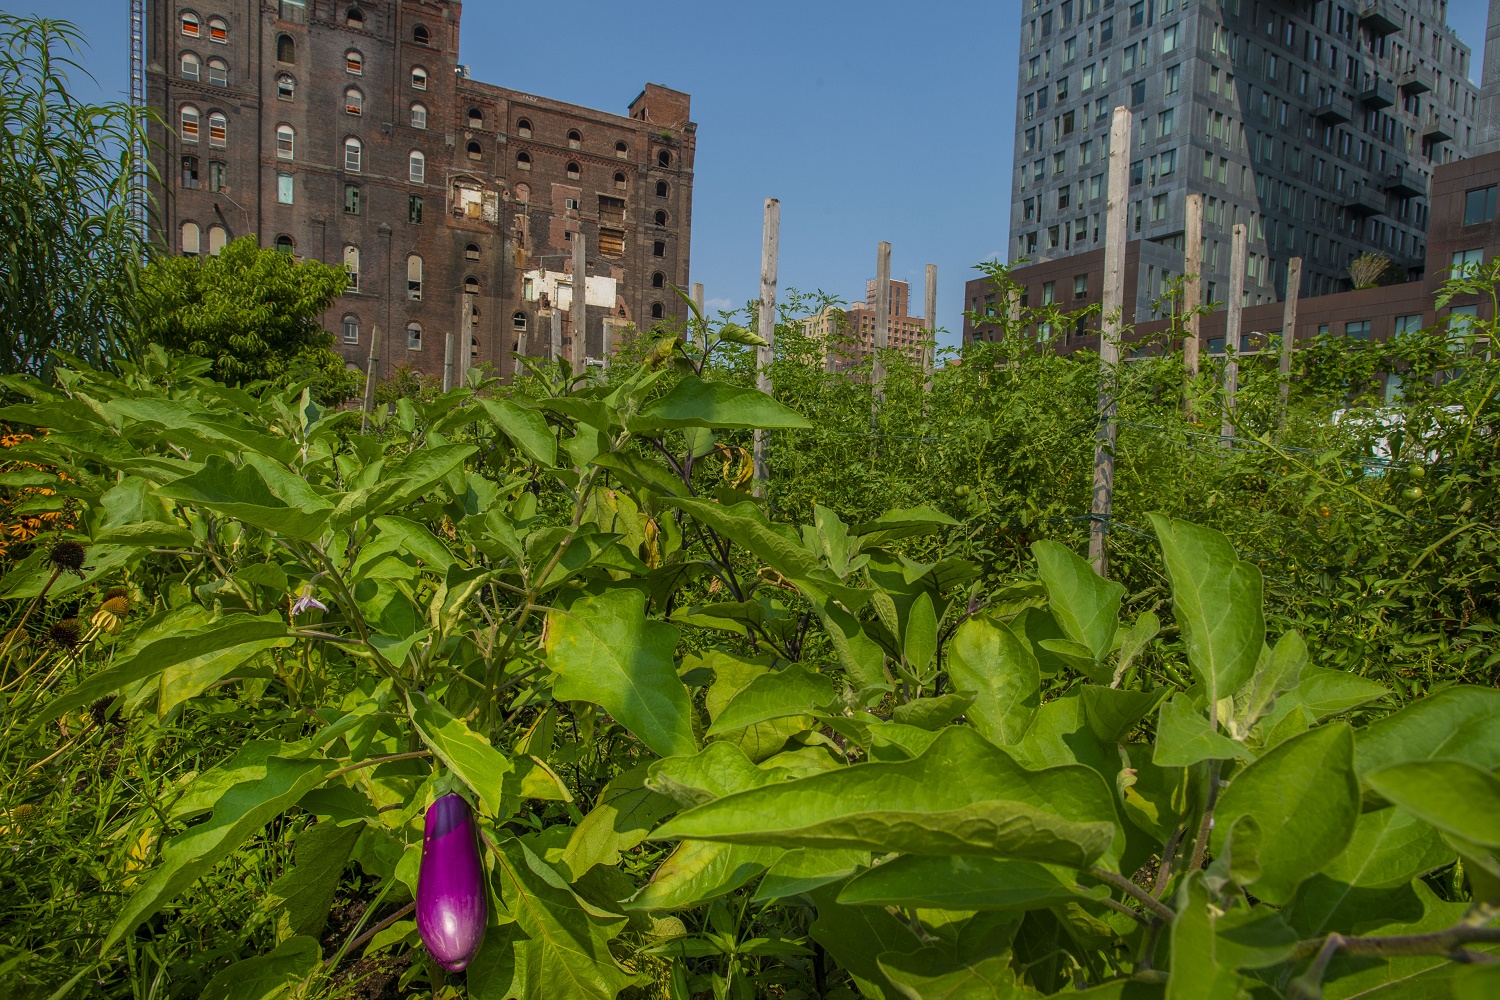 A lone eggplant waits to be picked at the North Brooklyn Farm (NBF) in the shadow of the Williamsburg Bridge is a site for agritourism where crops are grown. USDA Photo by Preston Keres